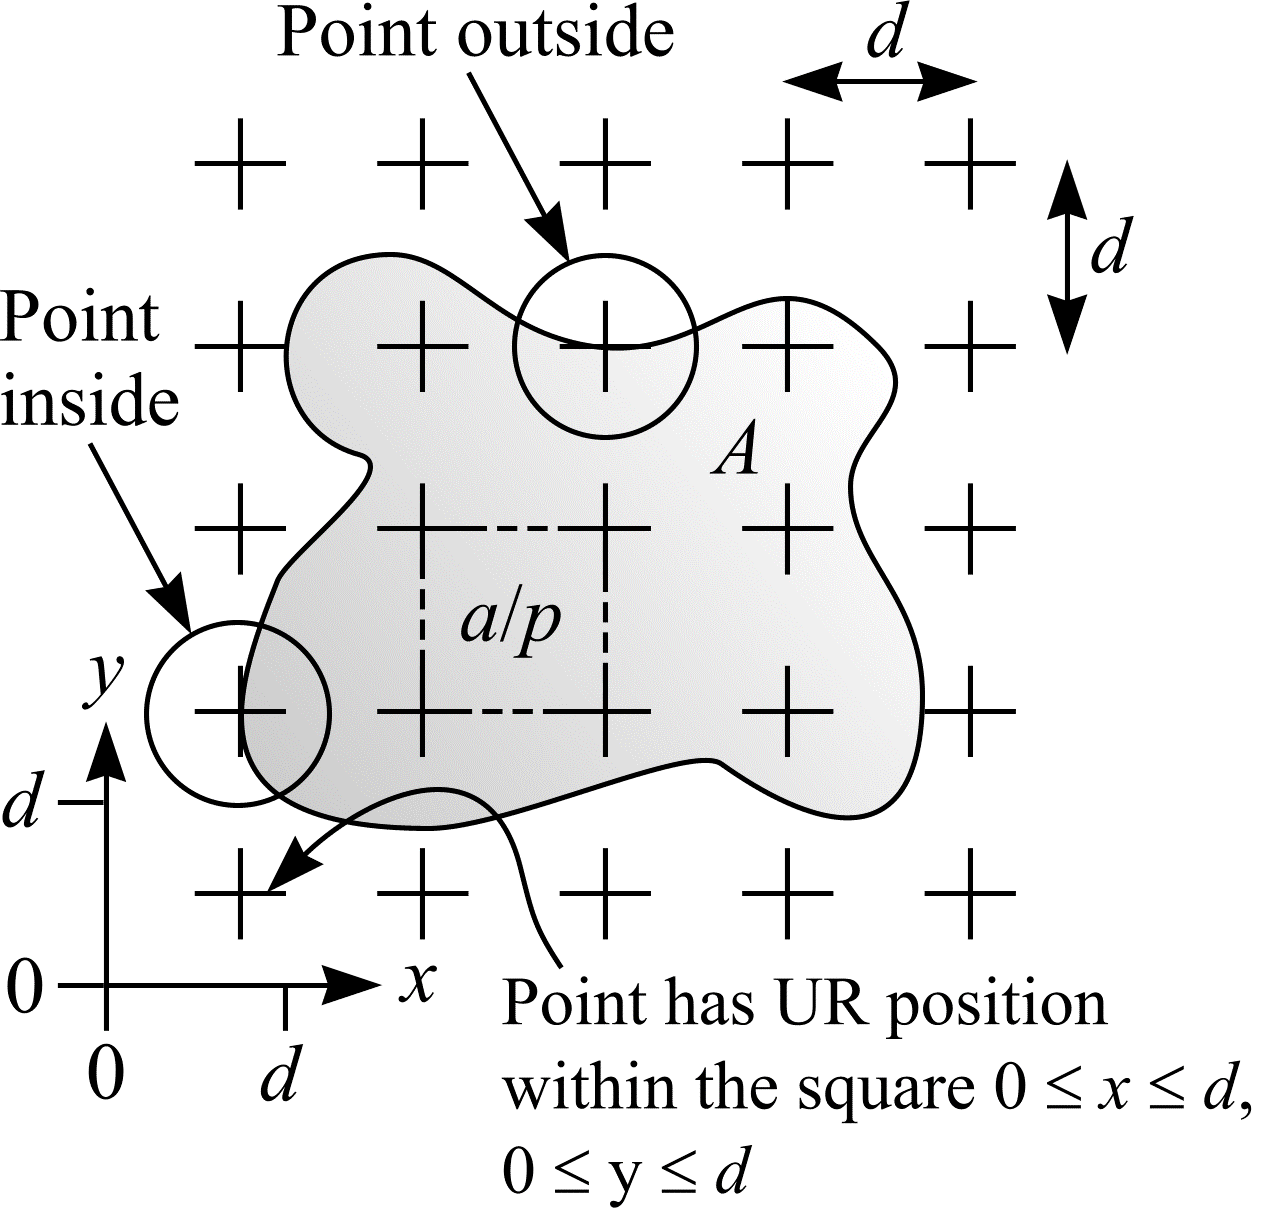 Area estimation using a test system of points